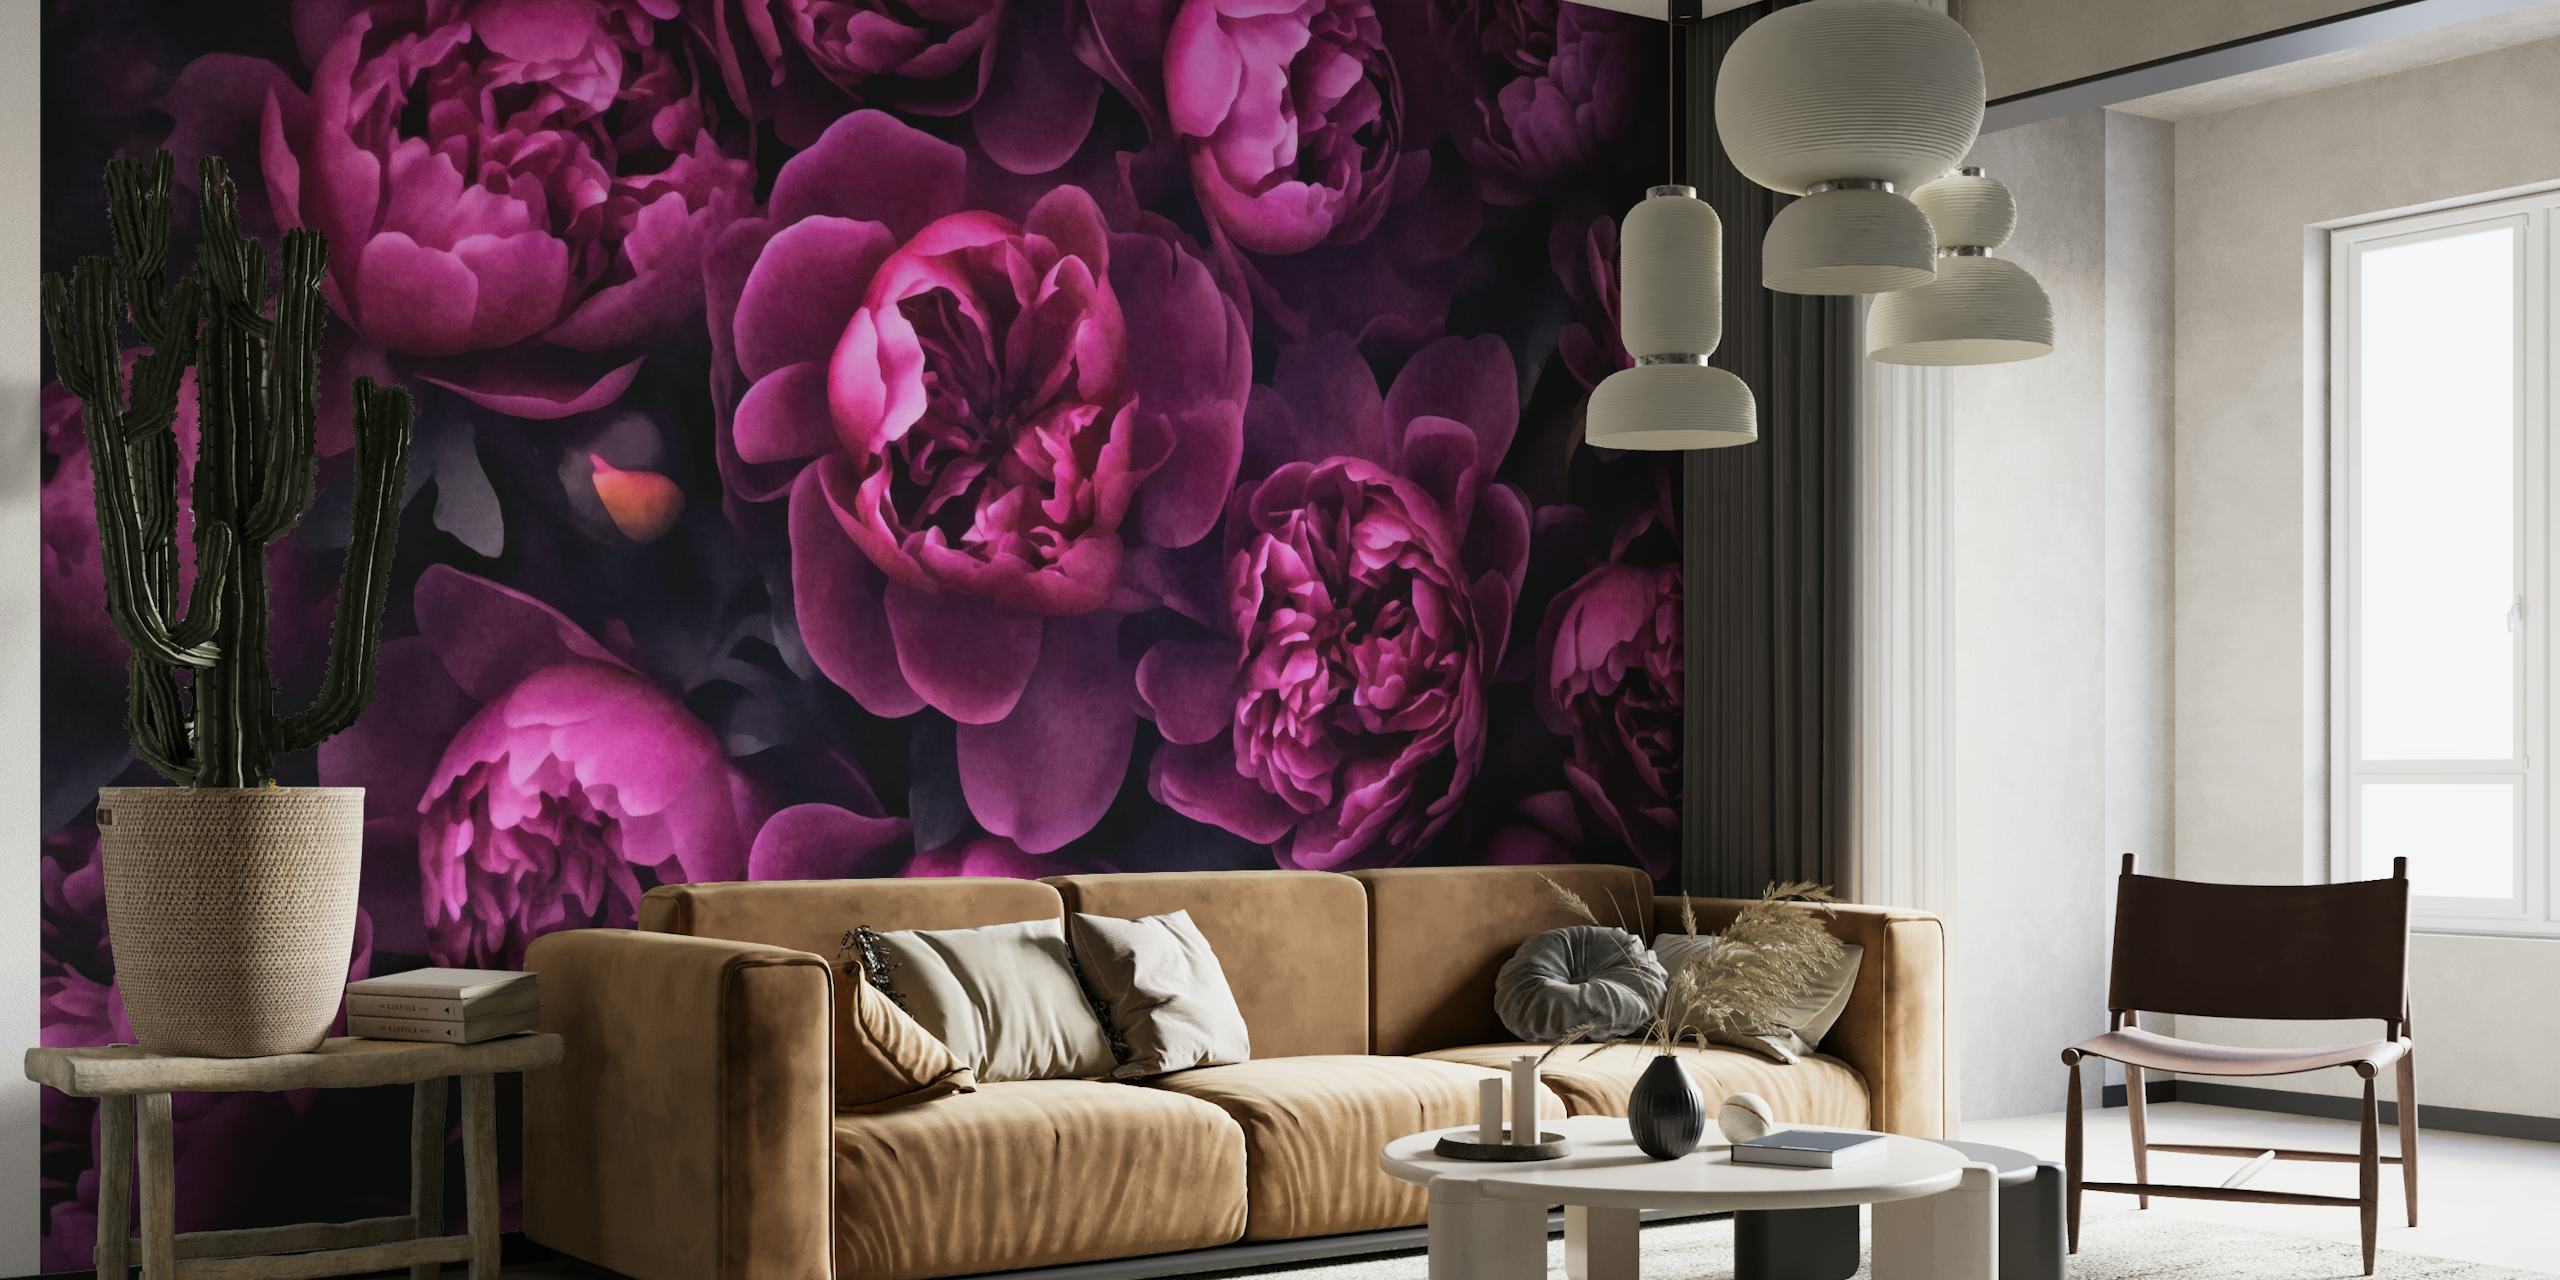 Luxurious pink peonies wall mural with a dark, elegant background